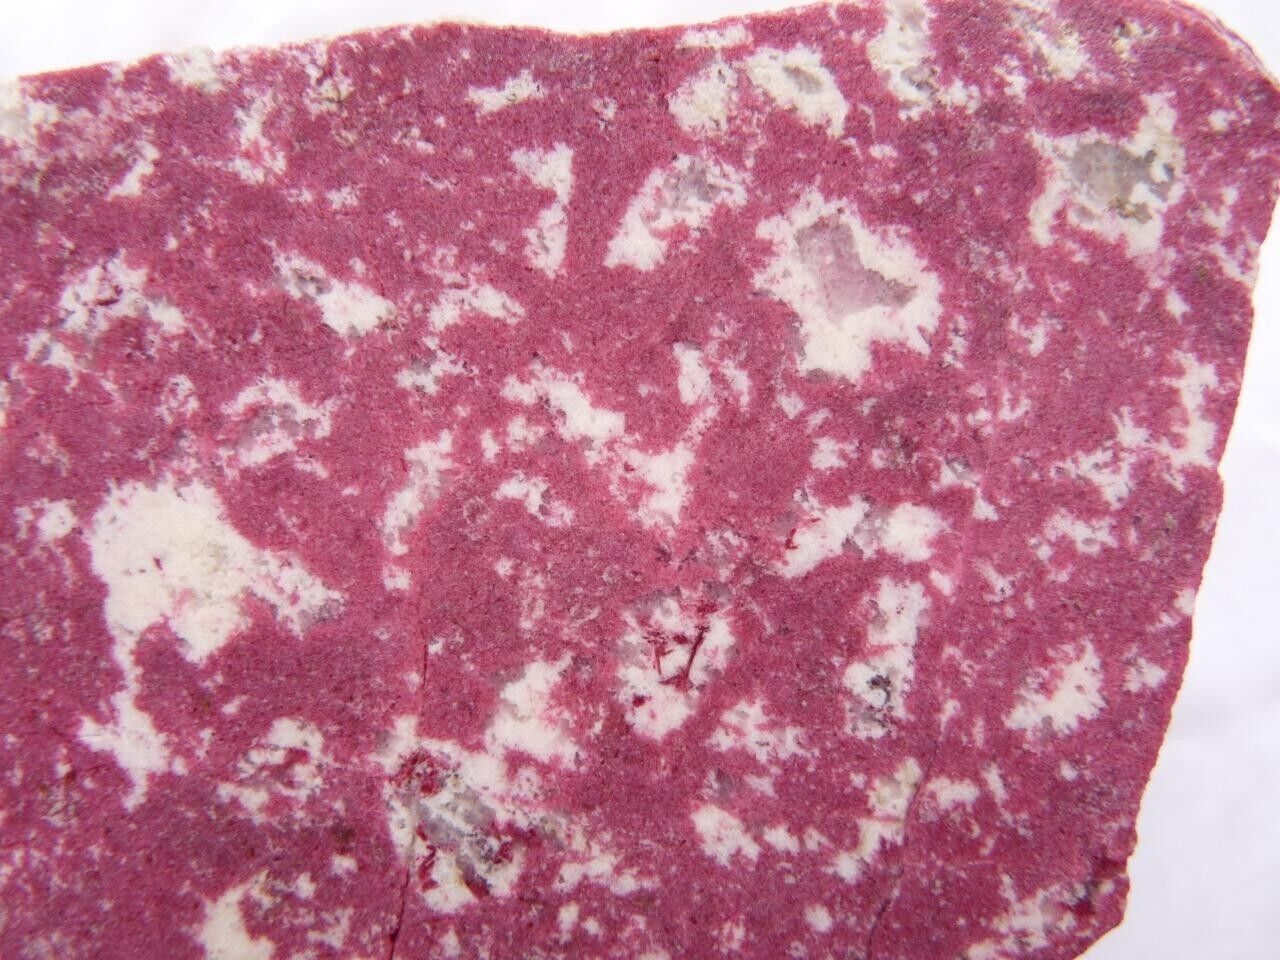 Rare NORWEGIAN PINK THULITE faced rough… seldom offered… beautiful color… 1.7 lb